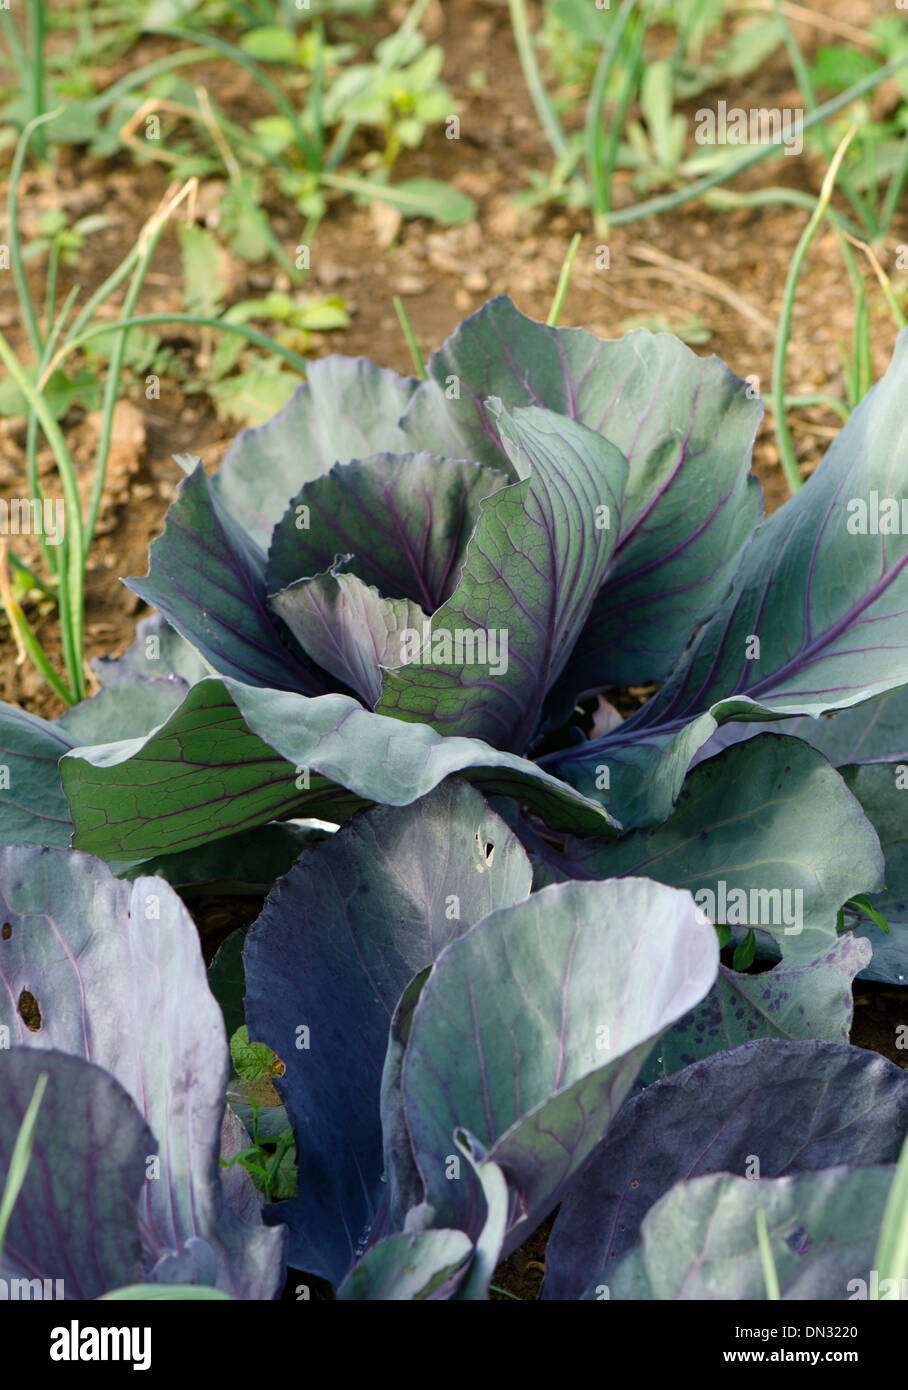 Red Cabbage, Brassica oleracea var. capitata f. rubra, growing in vegetables garden in southern Spain. Stock Photo